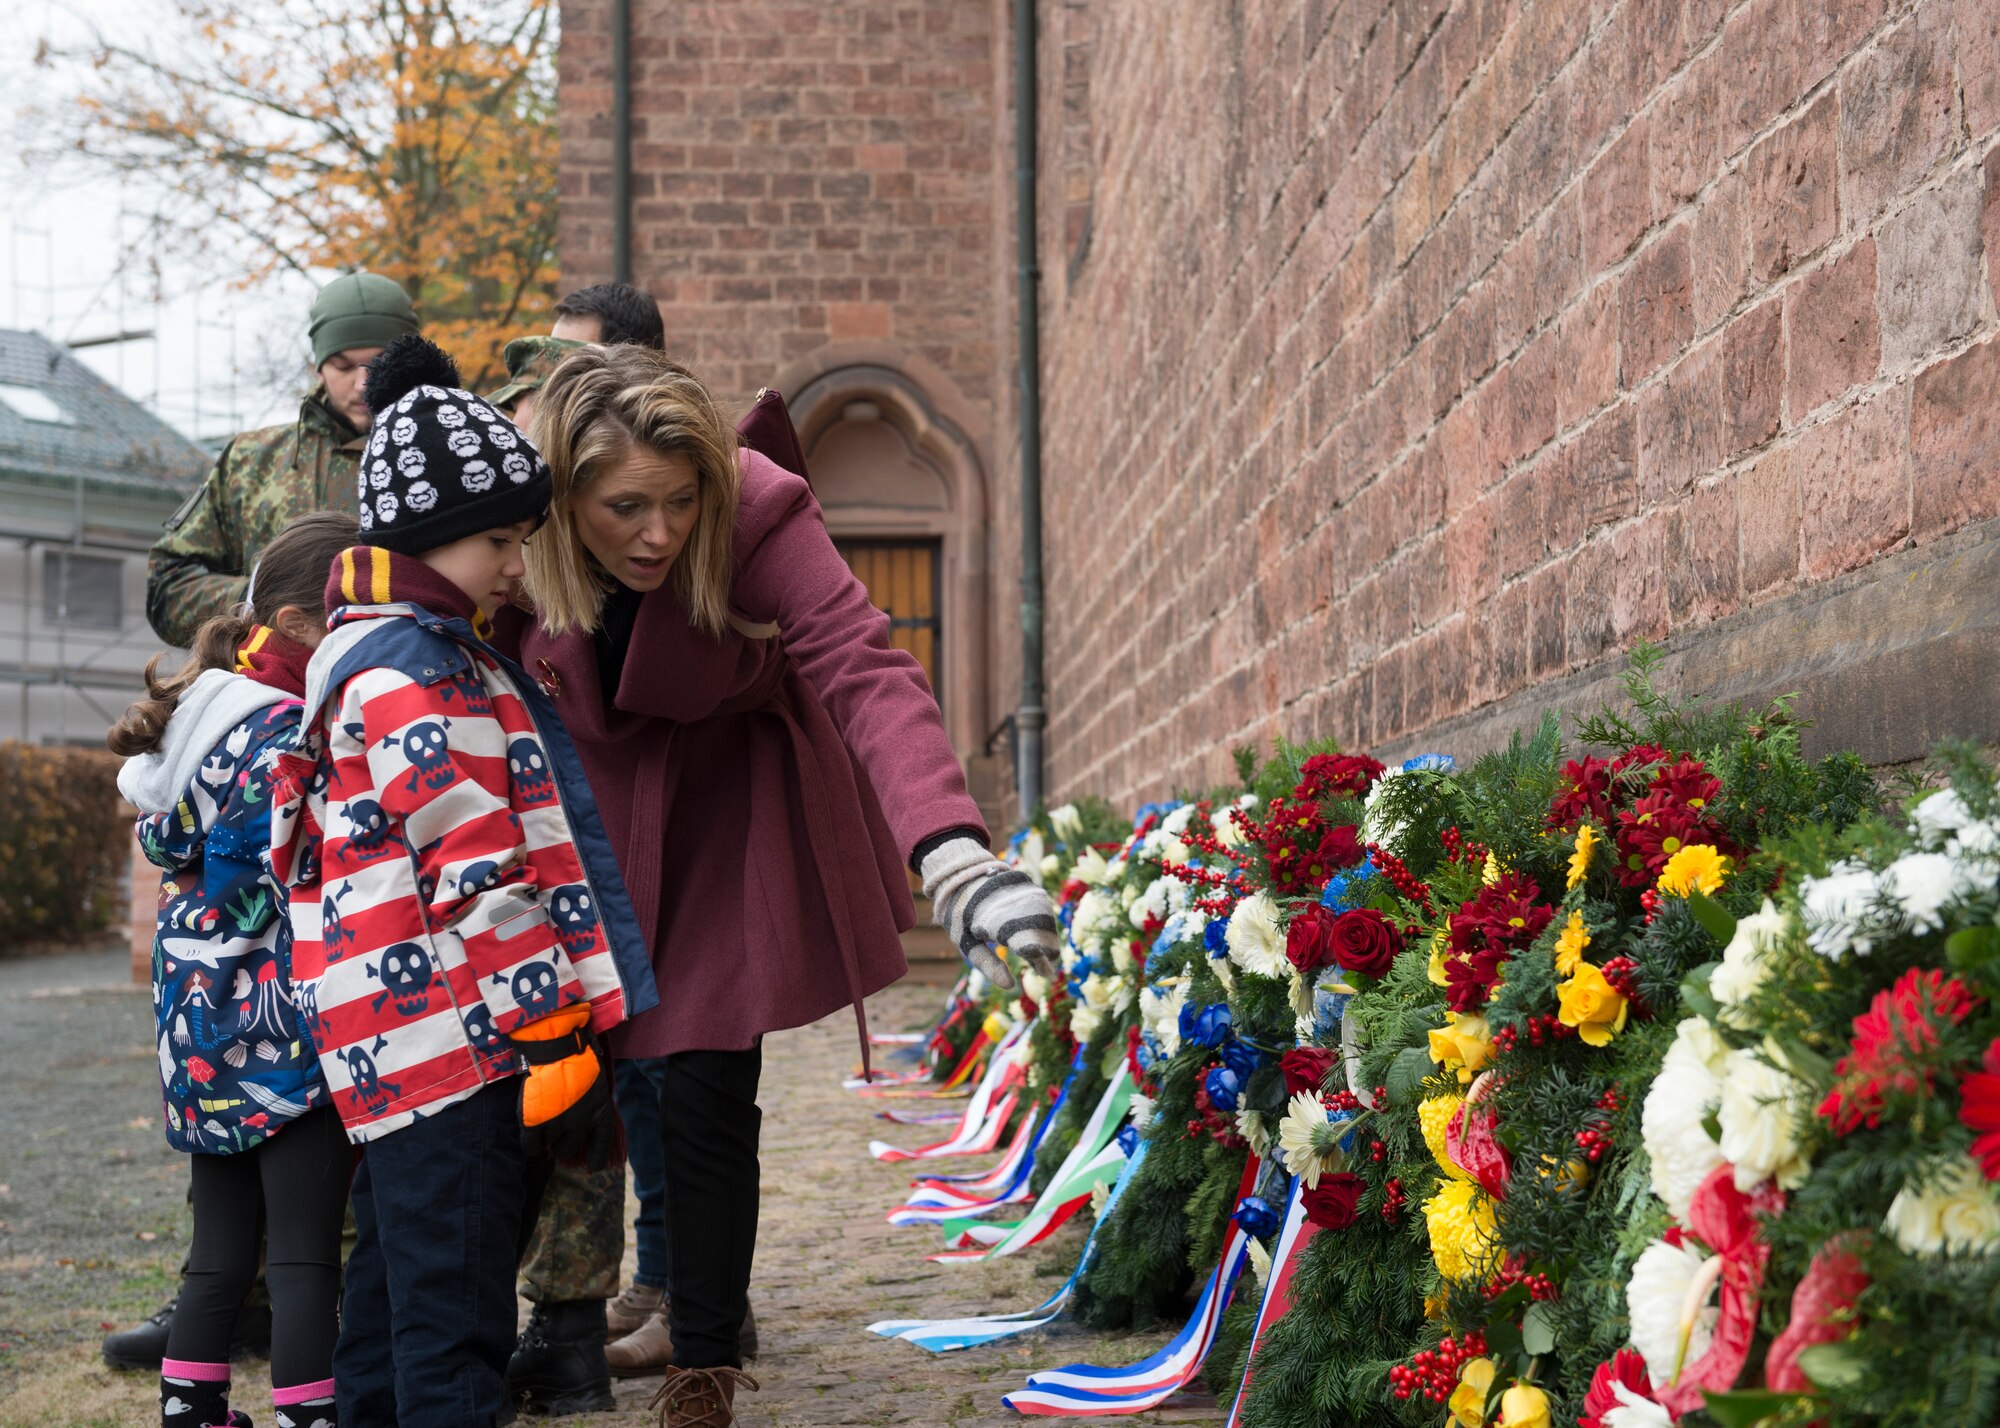 Maxine Antoniou, event attendee, explains the wreaths of various NATO countries to her children at the Ramstein-Miesenbach’s National Day of Mourning Ceremony, Nov. 17, 2019. Antoniou, a former Royal Air Force flight lieutenant, has frequented dedication ceremonies over several years with her children in order to teach them about the past and show the importance of the past sacrifices for freedom and peace.